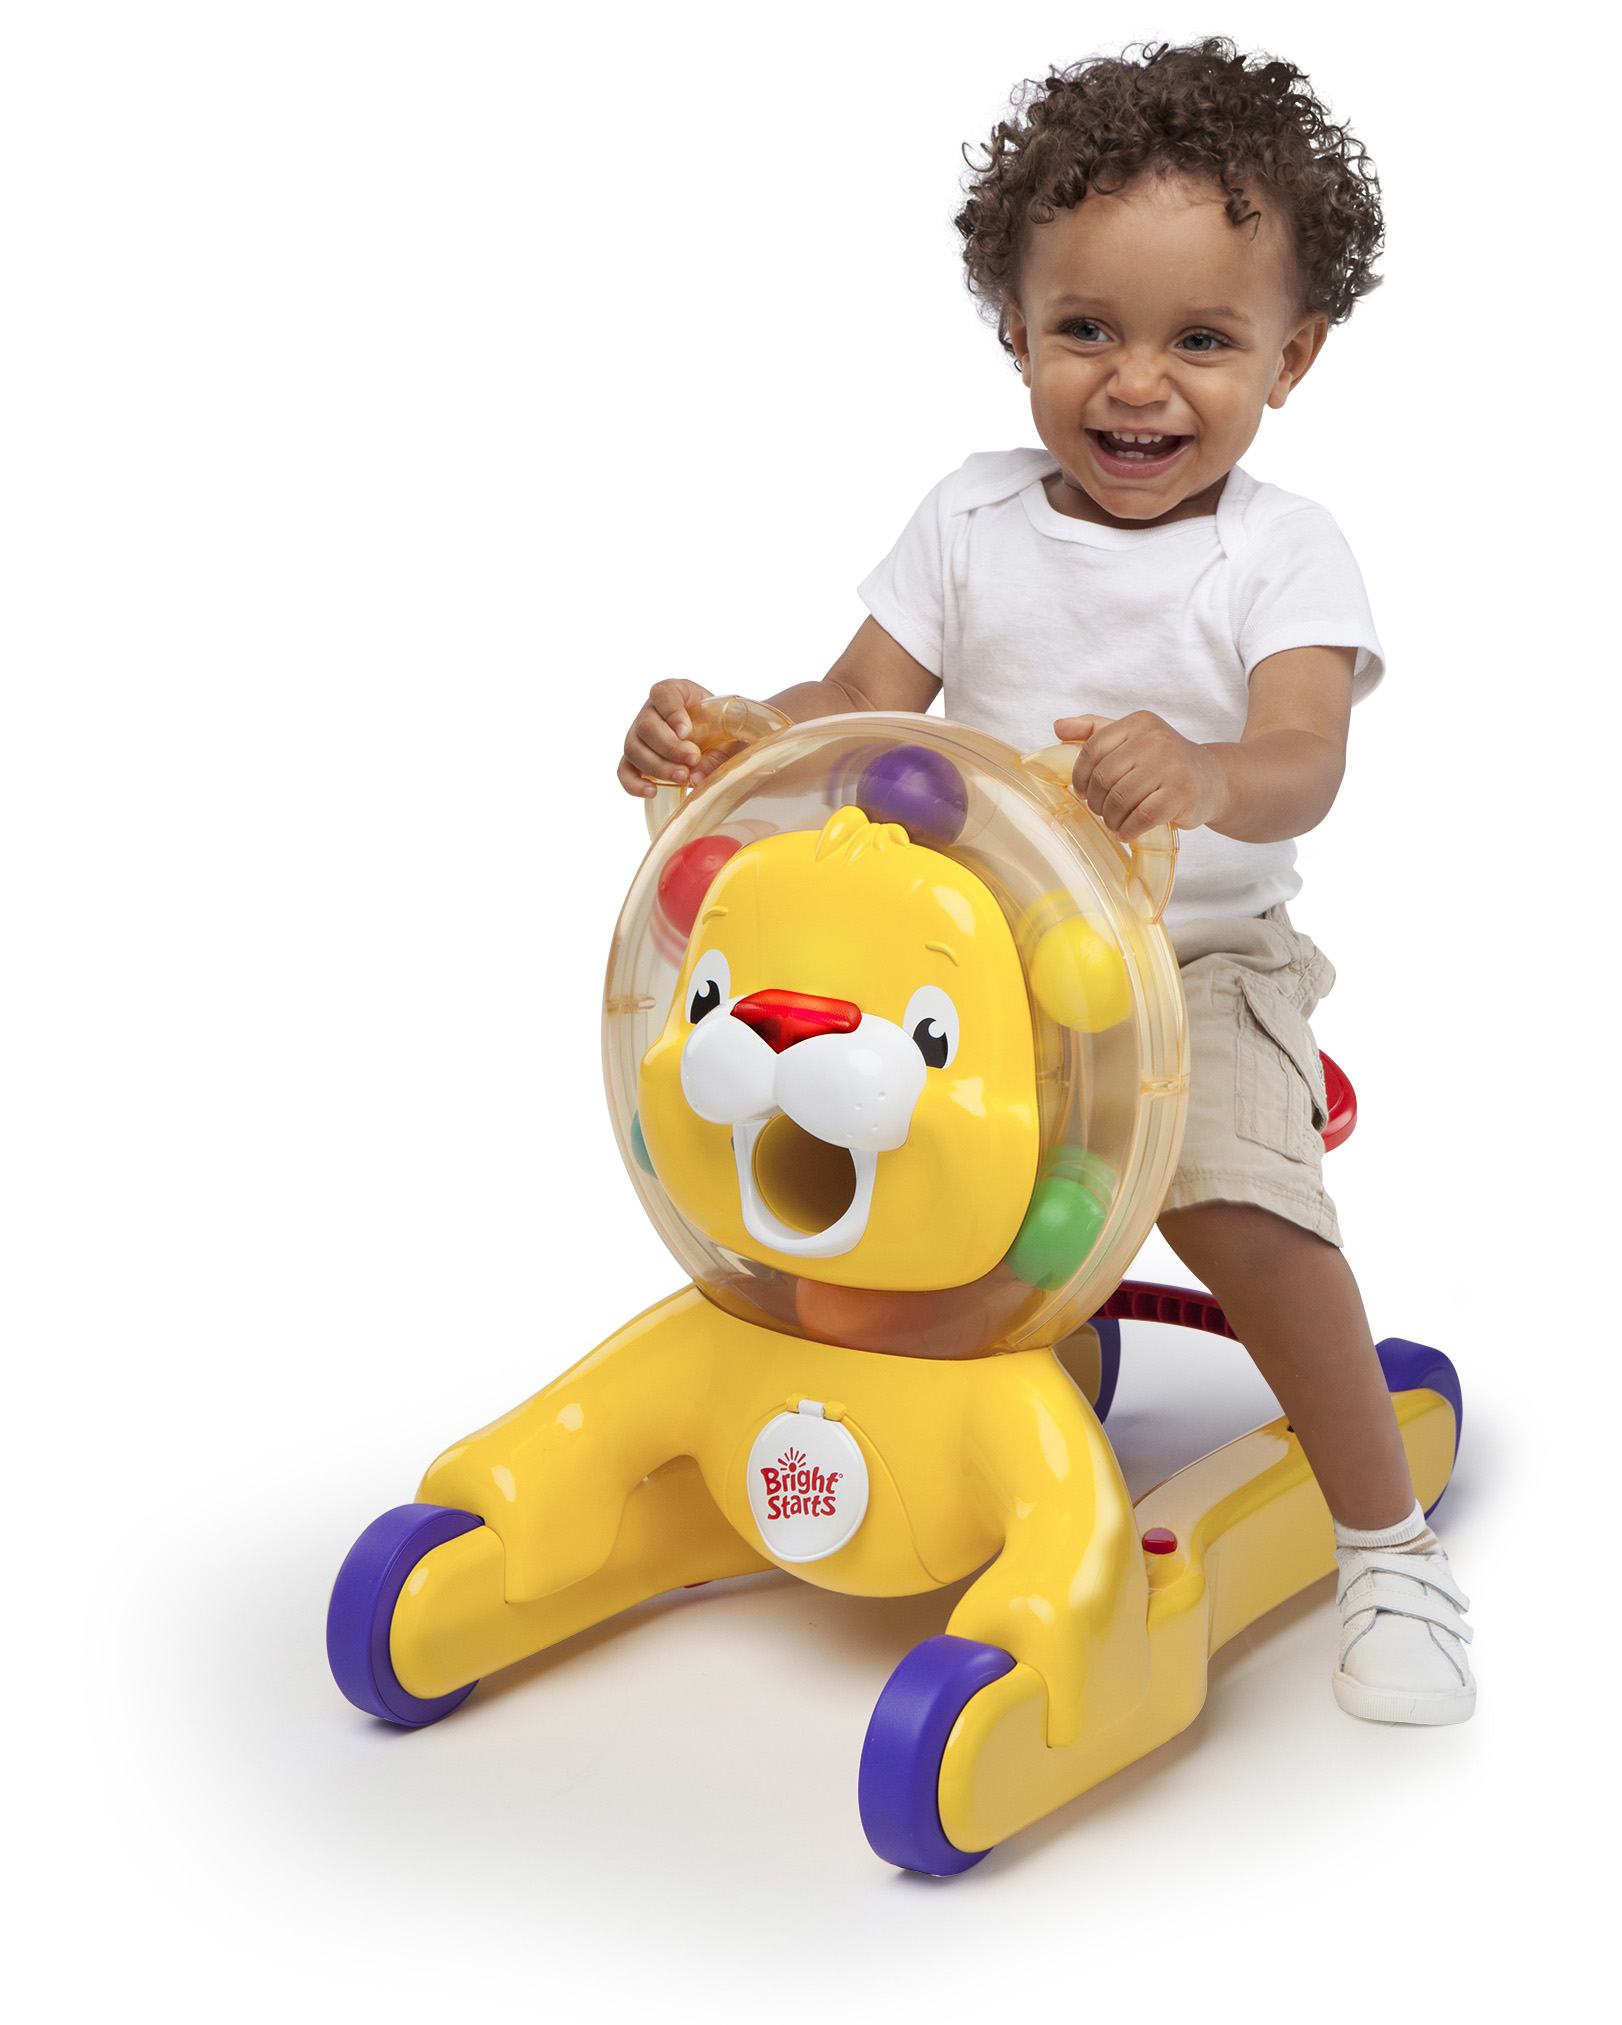 3-in-1 Step 'N Ride Lion grows with baby and has three ways to play: sit and play, walk and play, walk and ride. When baby puts the balls into Lion-s mouth, the balls in the mane spin.